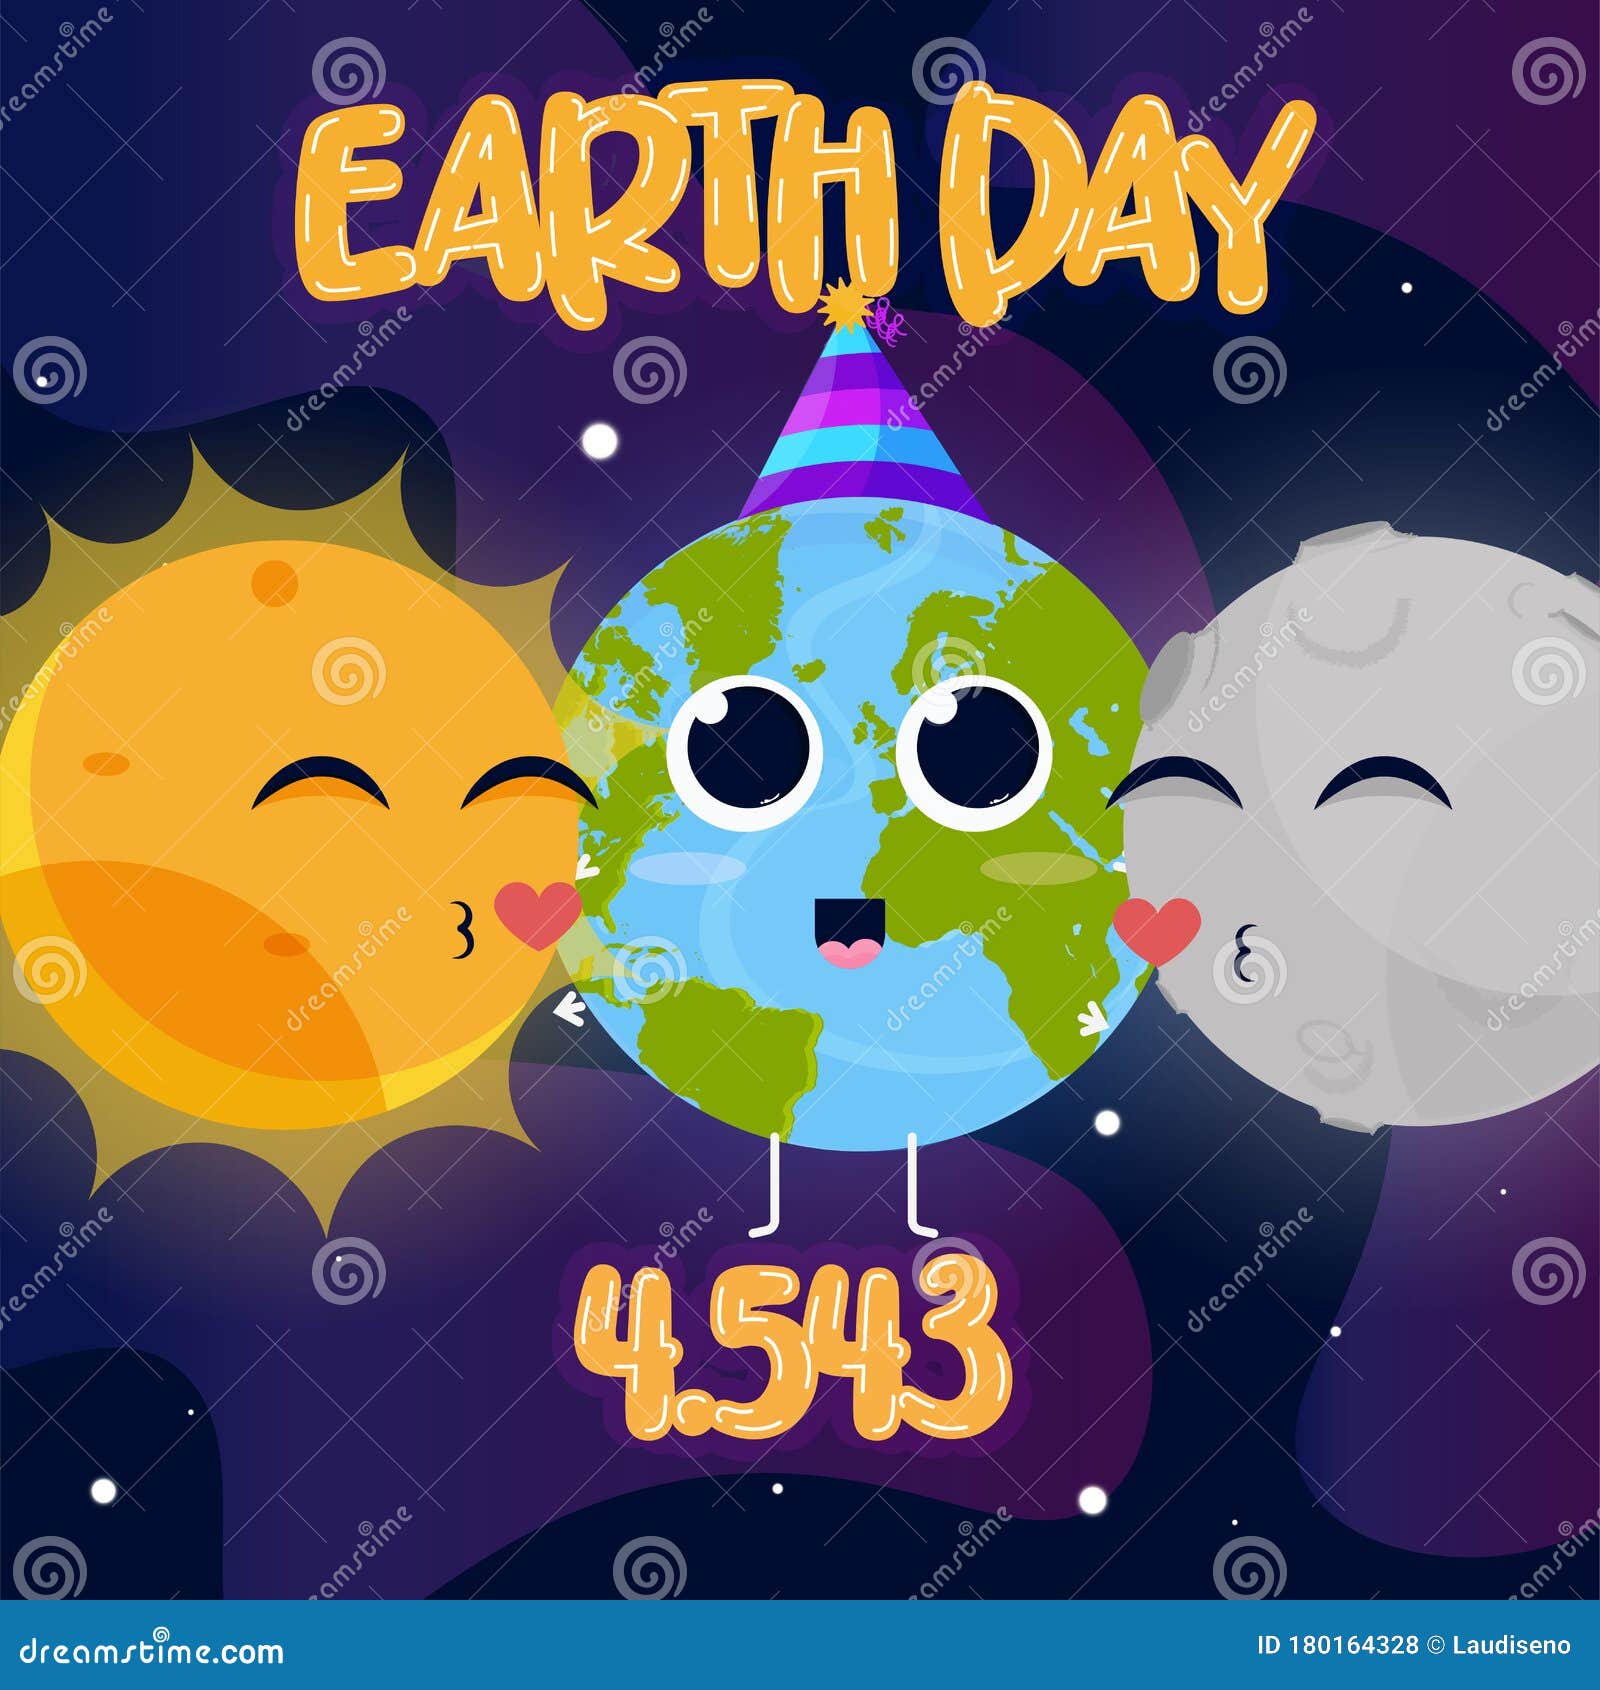 Earth day poster stock vector. Illustration of cartoon - 180164328